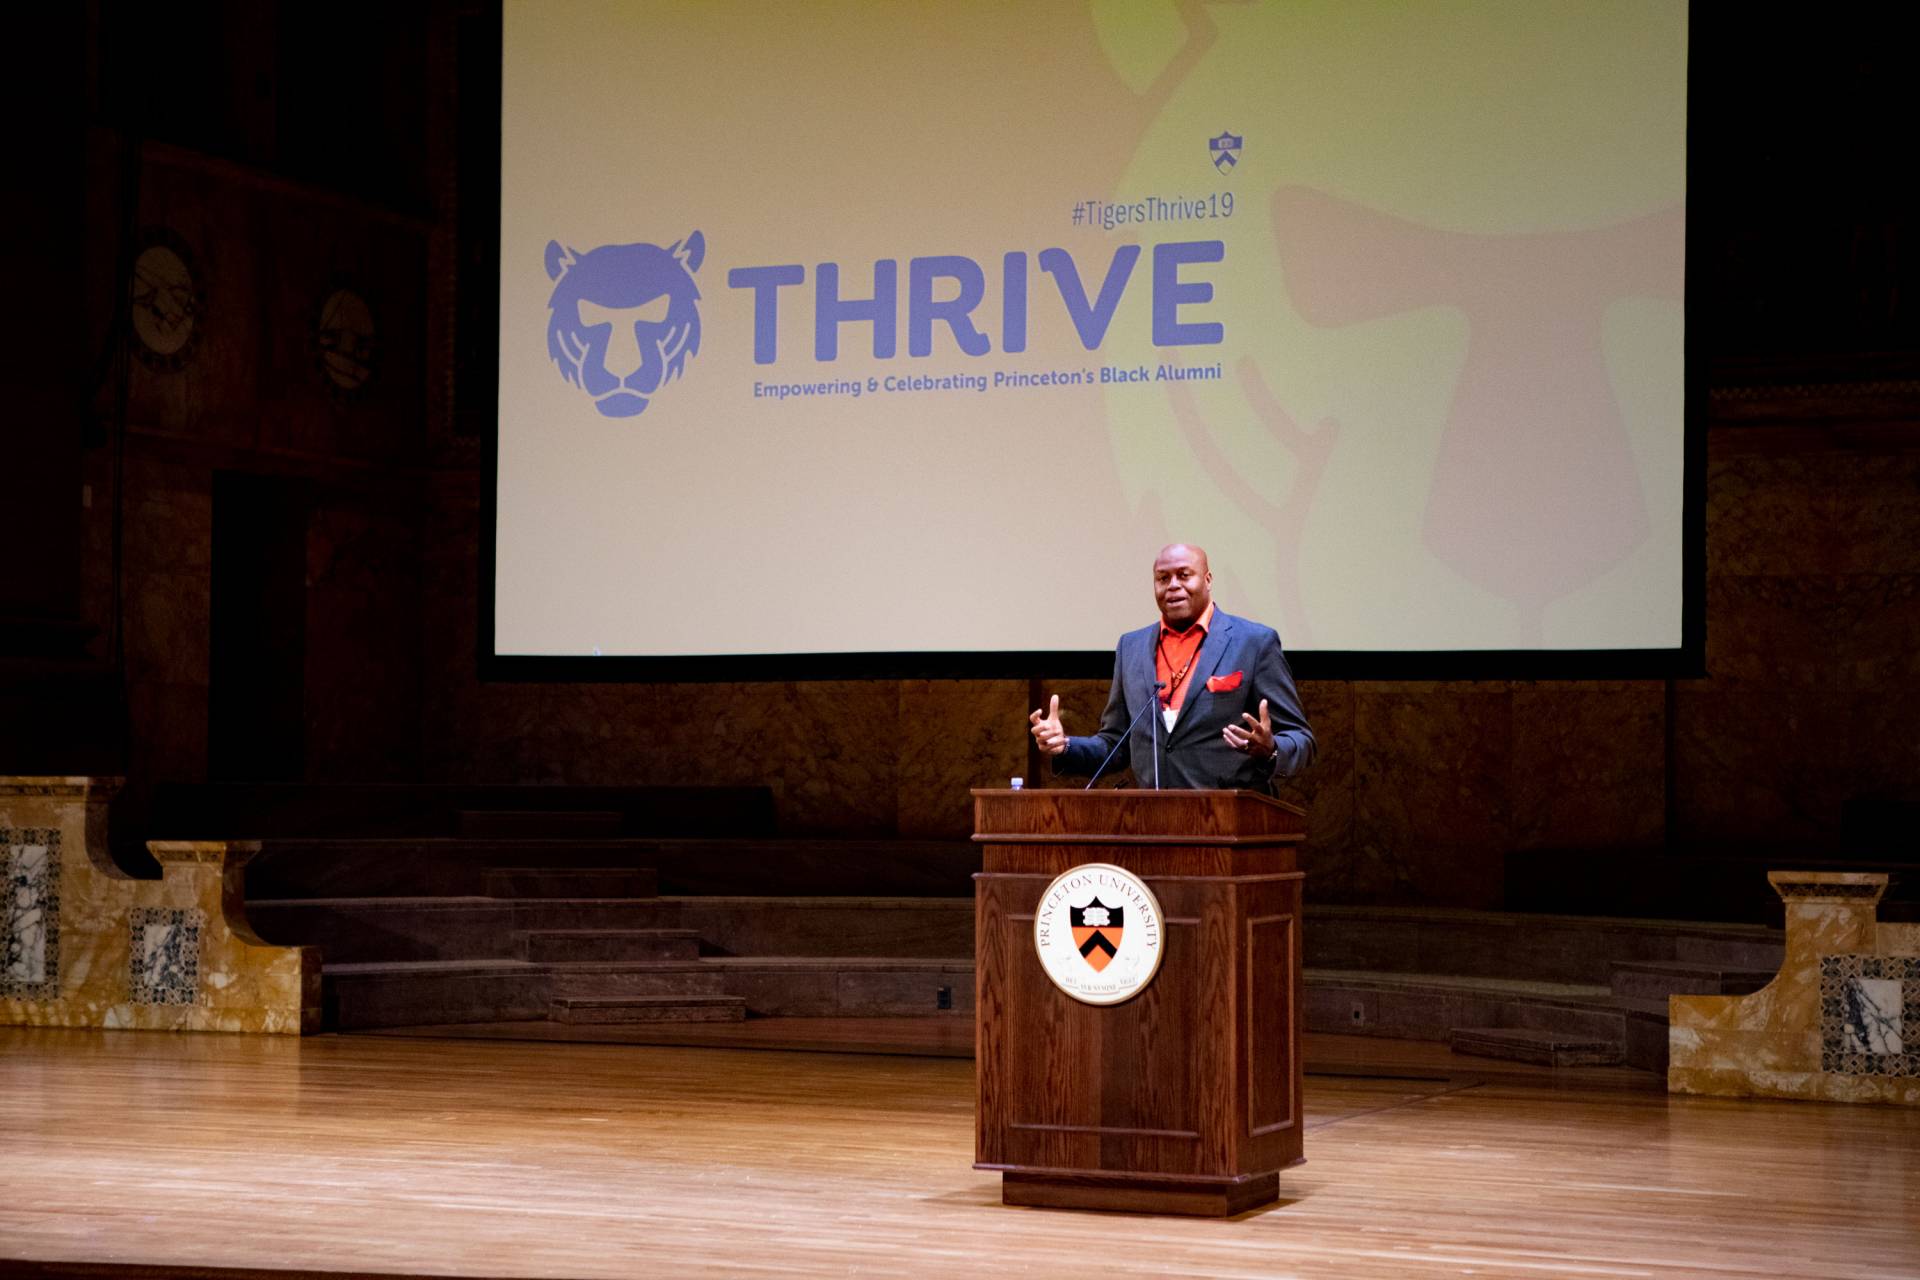 Craig Robinson speaking at podium in front of screen with the word THRIVE on it